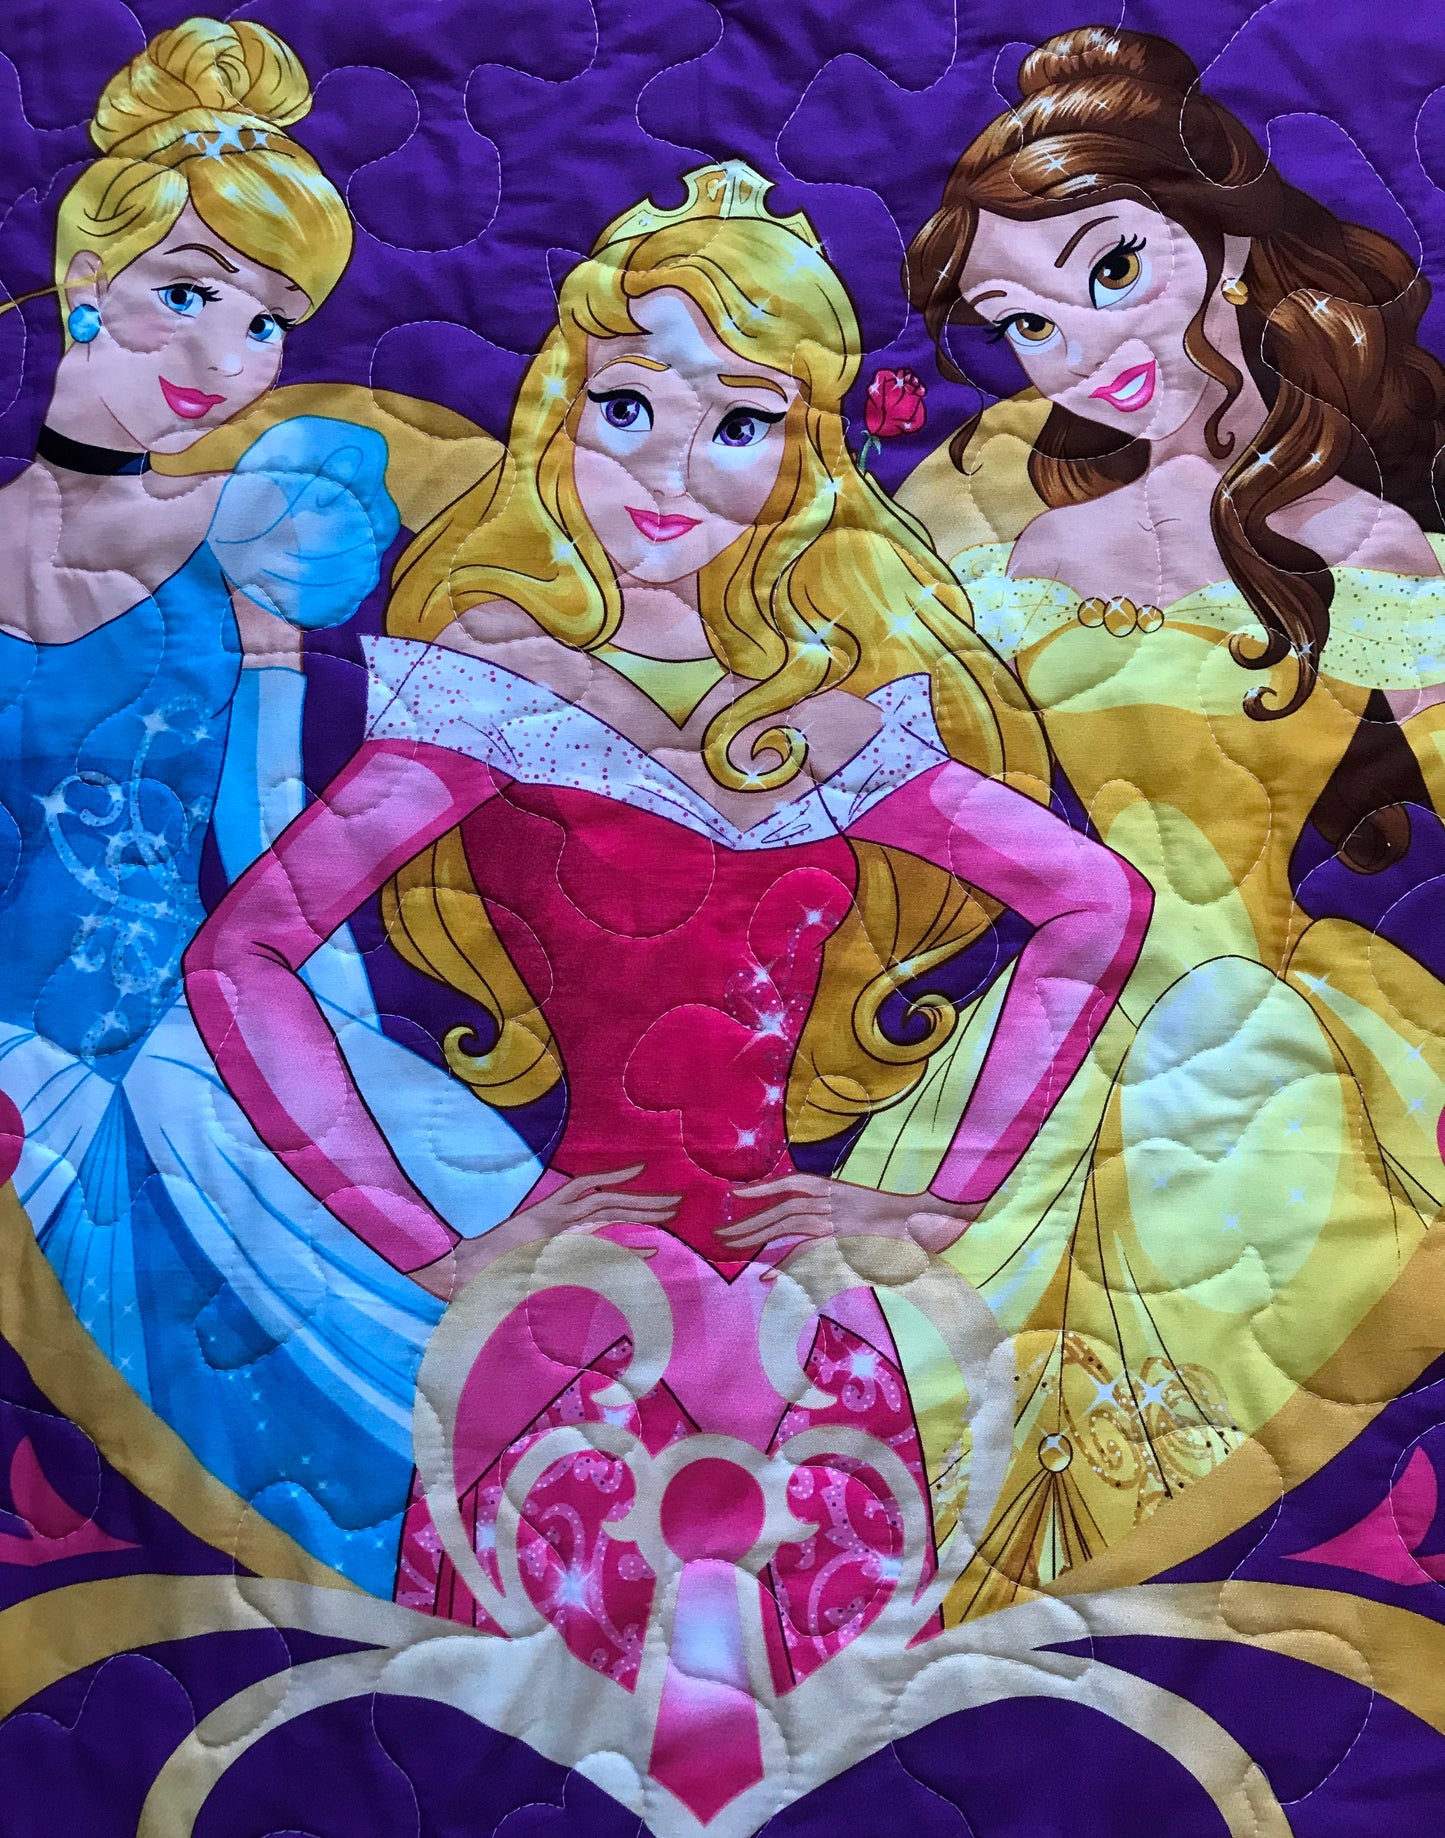 KEYS TO THE KINGDOM CINDERELLA SLEEPING BEAUTY BELLE Inspired Baby Child Quilted Blanket Baby Nursery Child Toddler Bedding